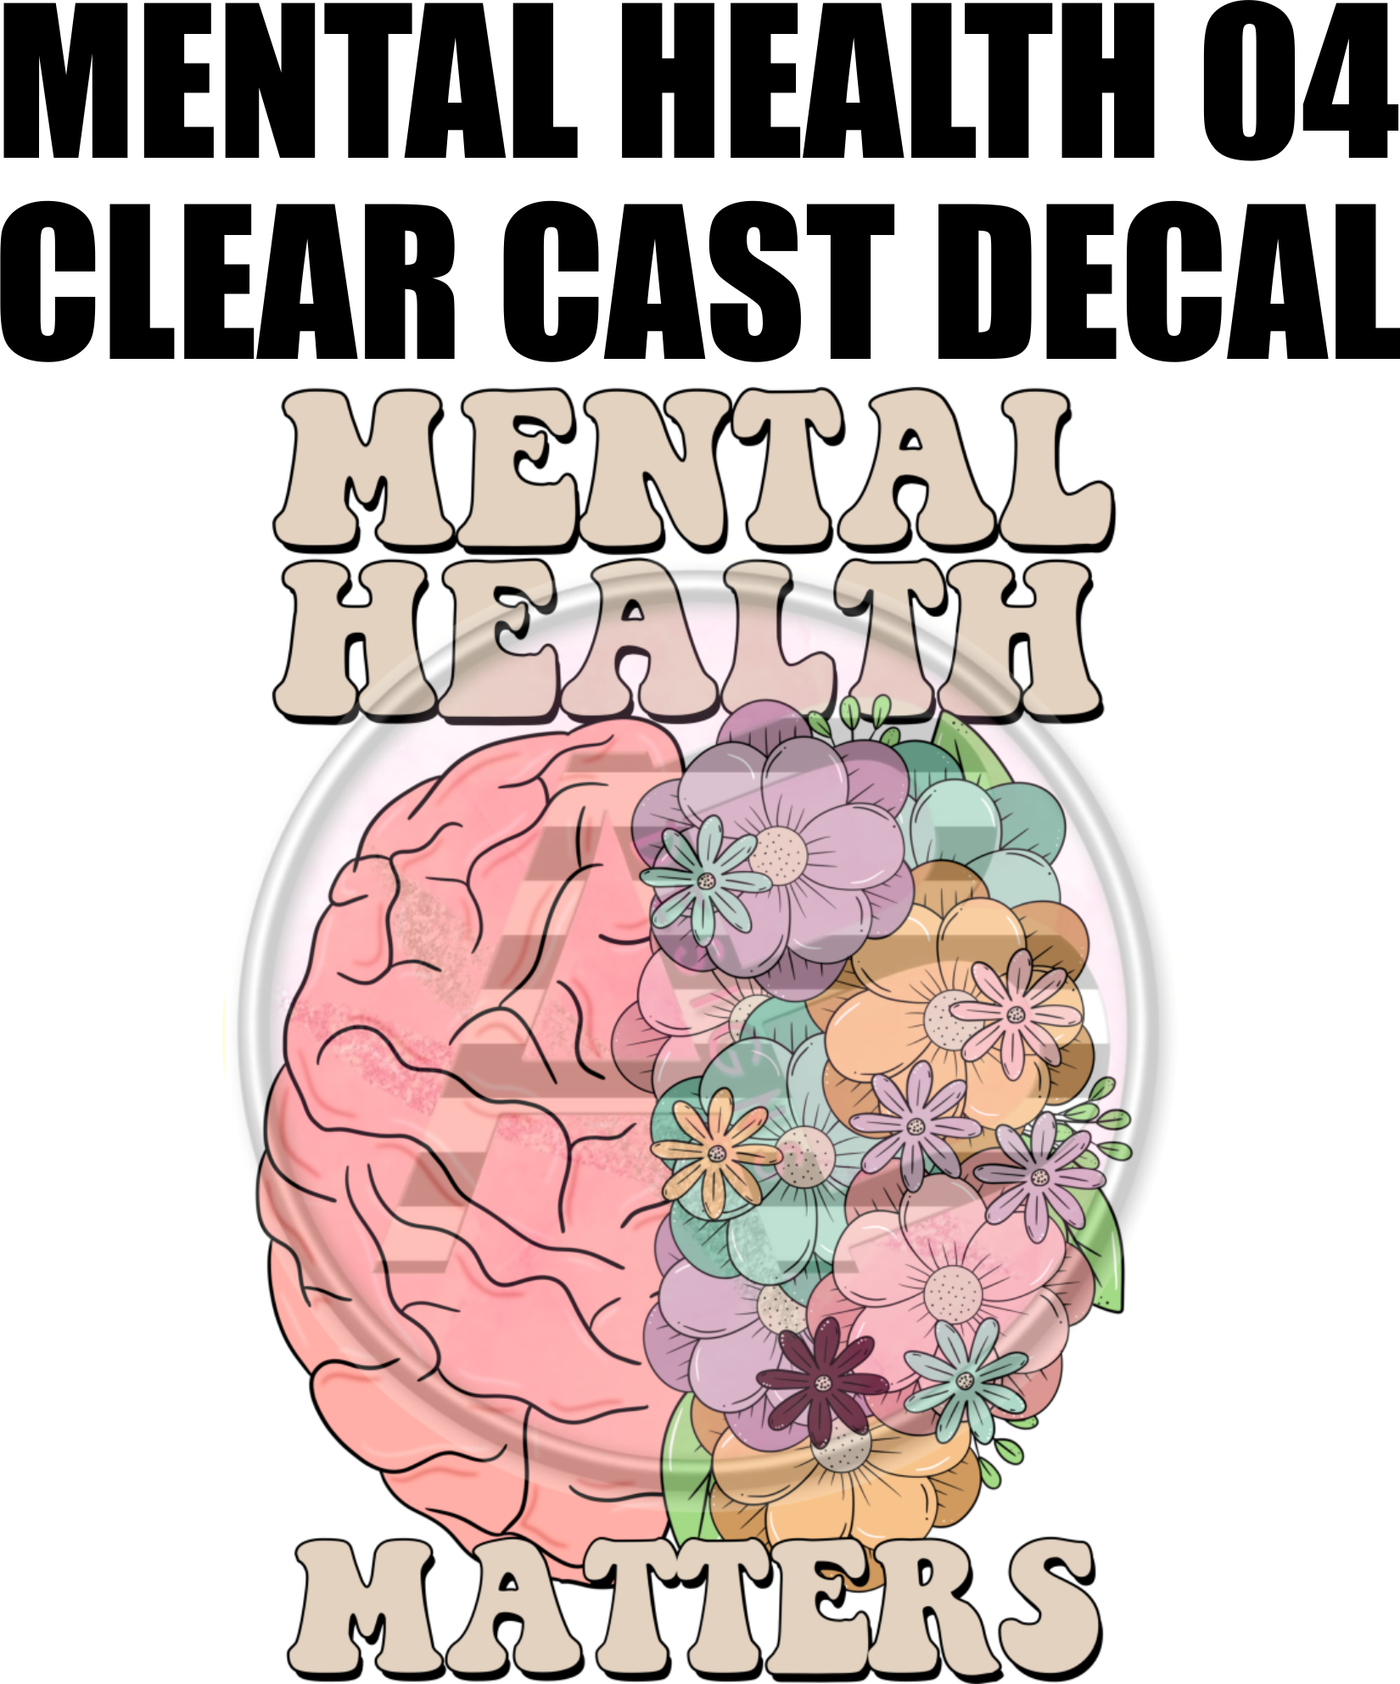 Mental Health 04 - Clear Cast Decal